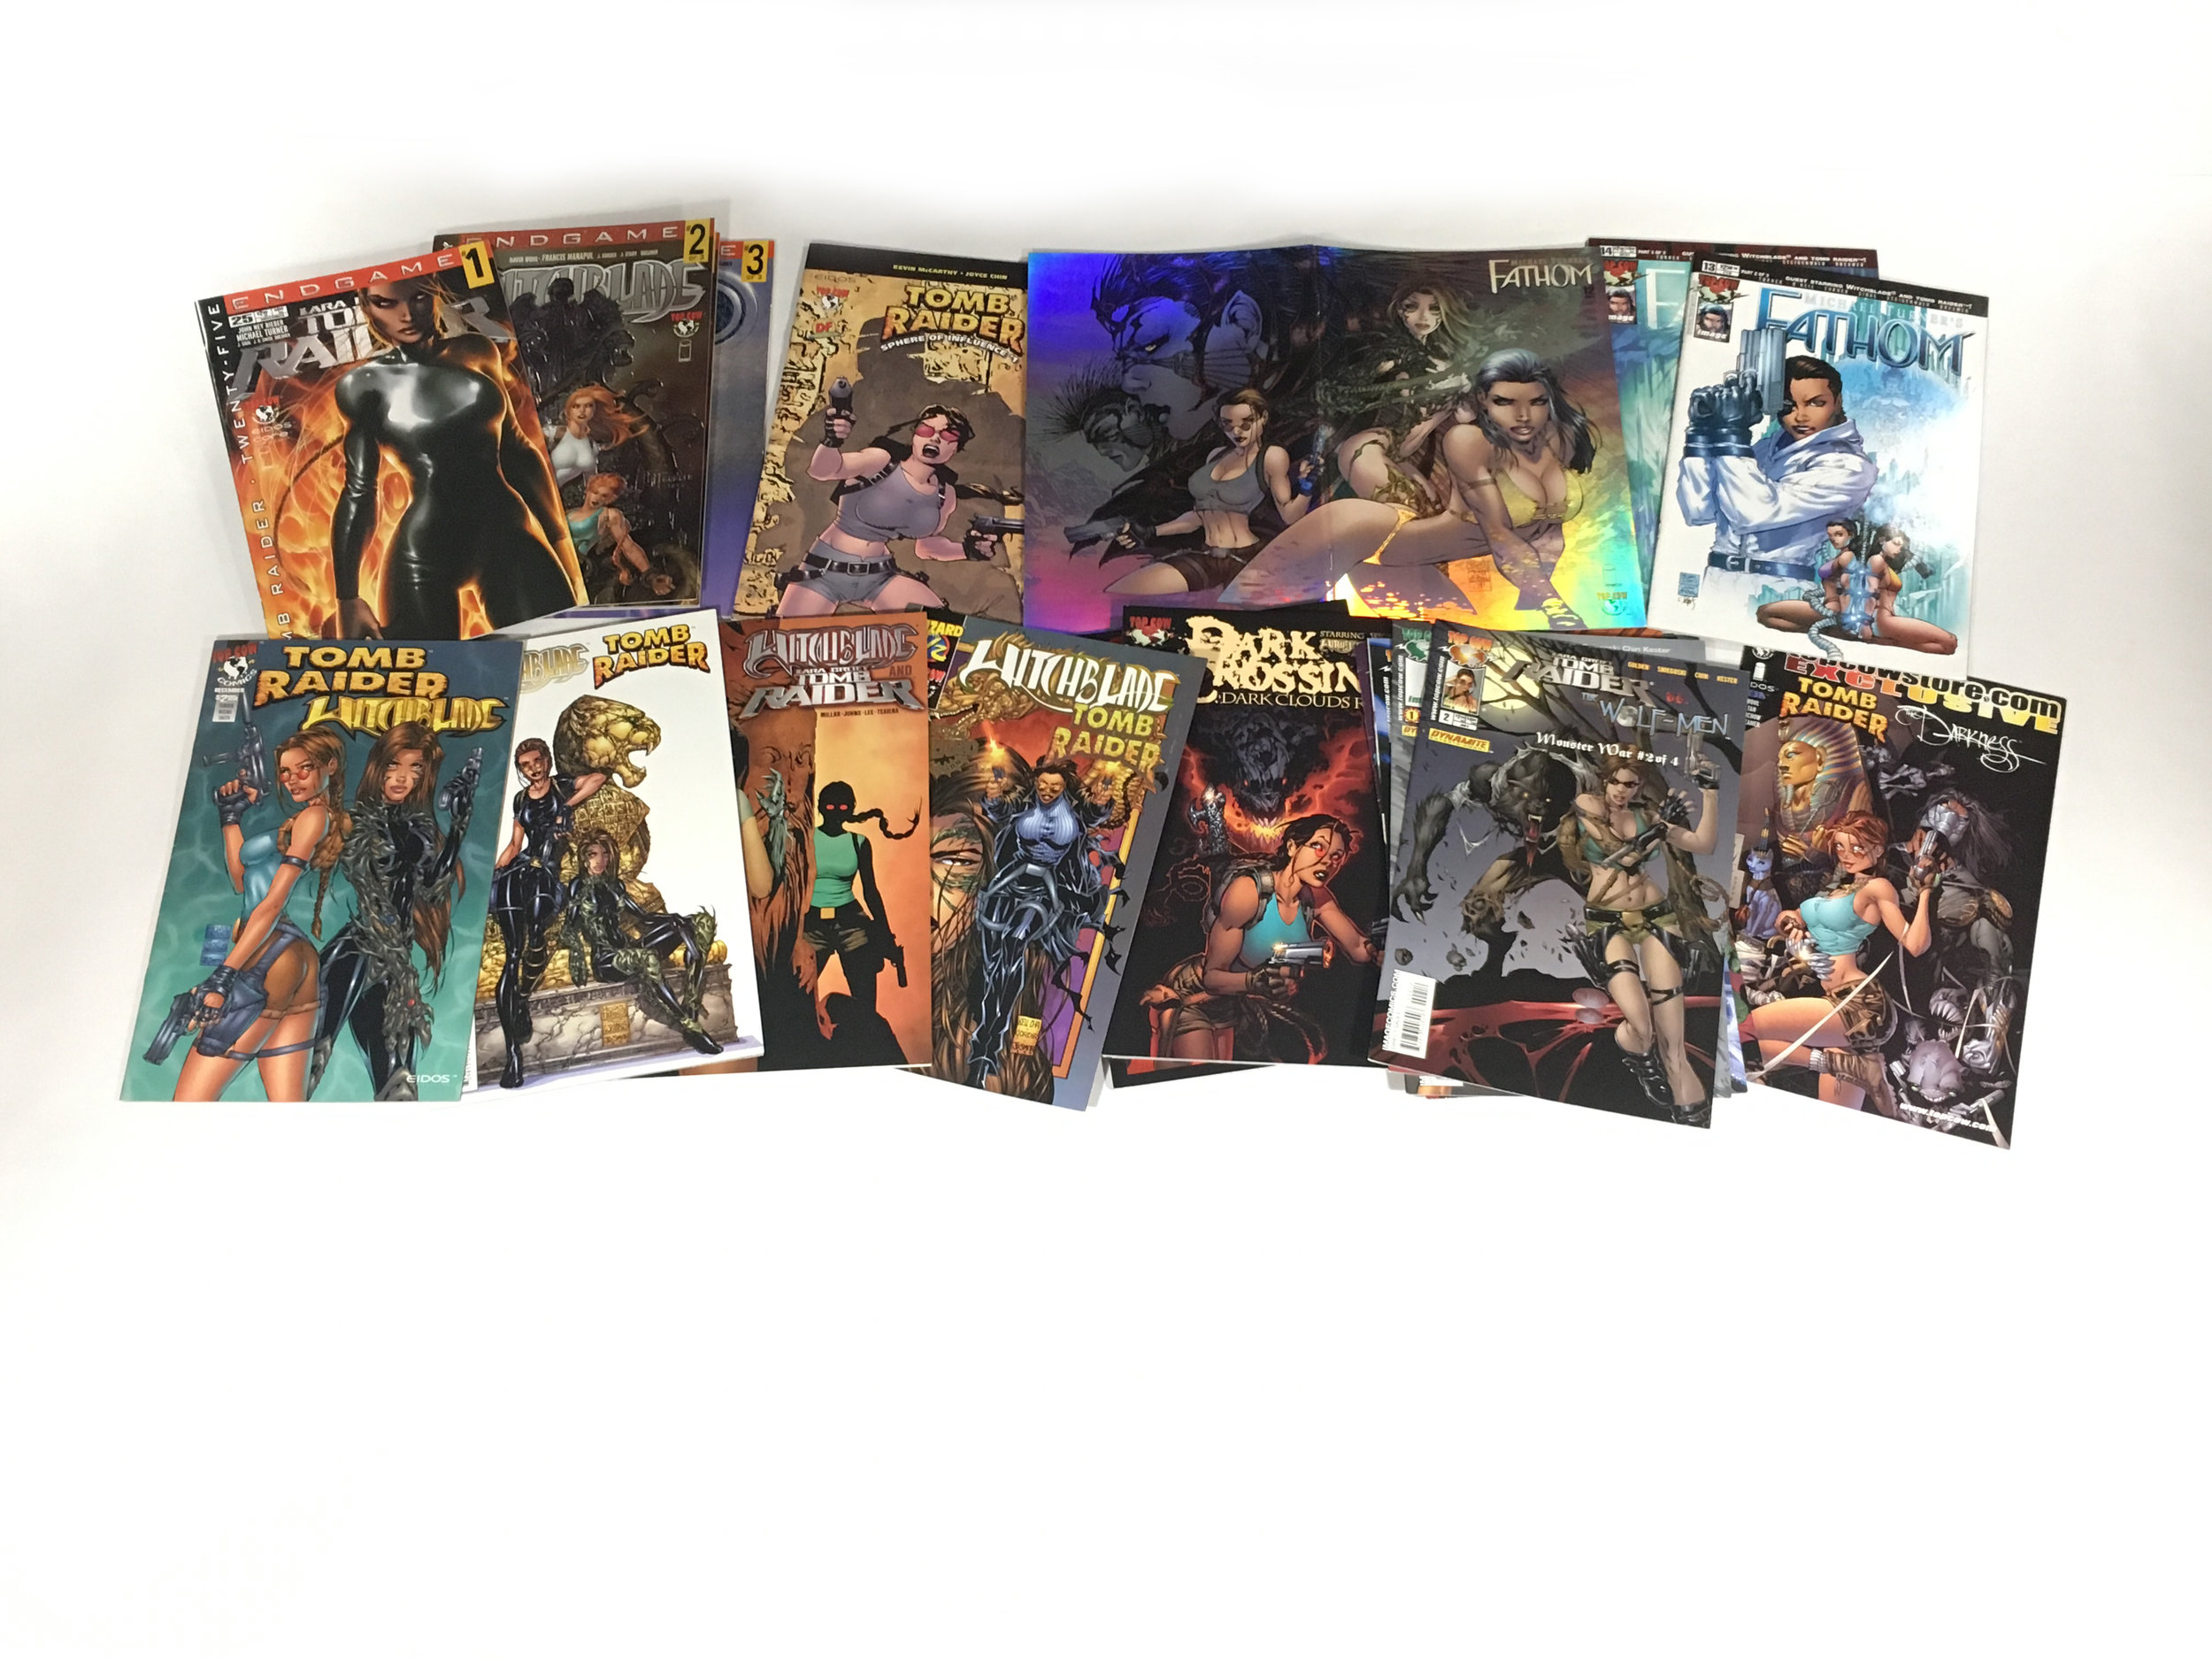  Top Cow came out with a dozen or so comics that could not be collected into a Library edition volume due to their crossovers with other various intellectual properties. That being the case, I submit to collecting paperback issues. However, if there’